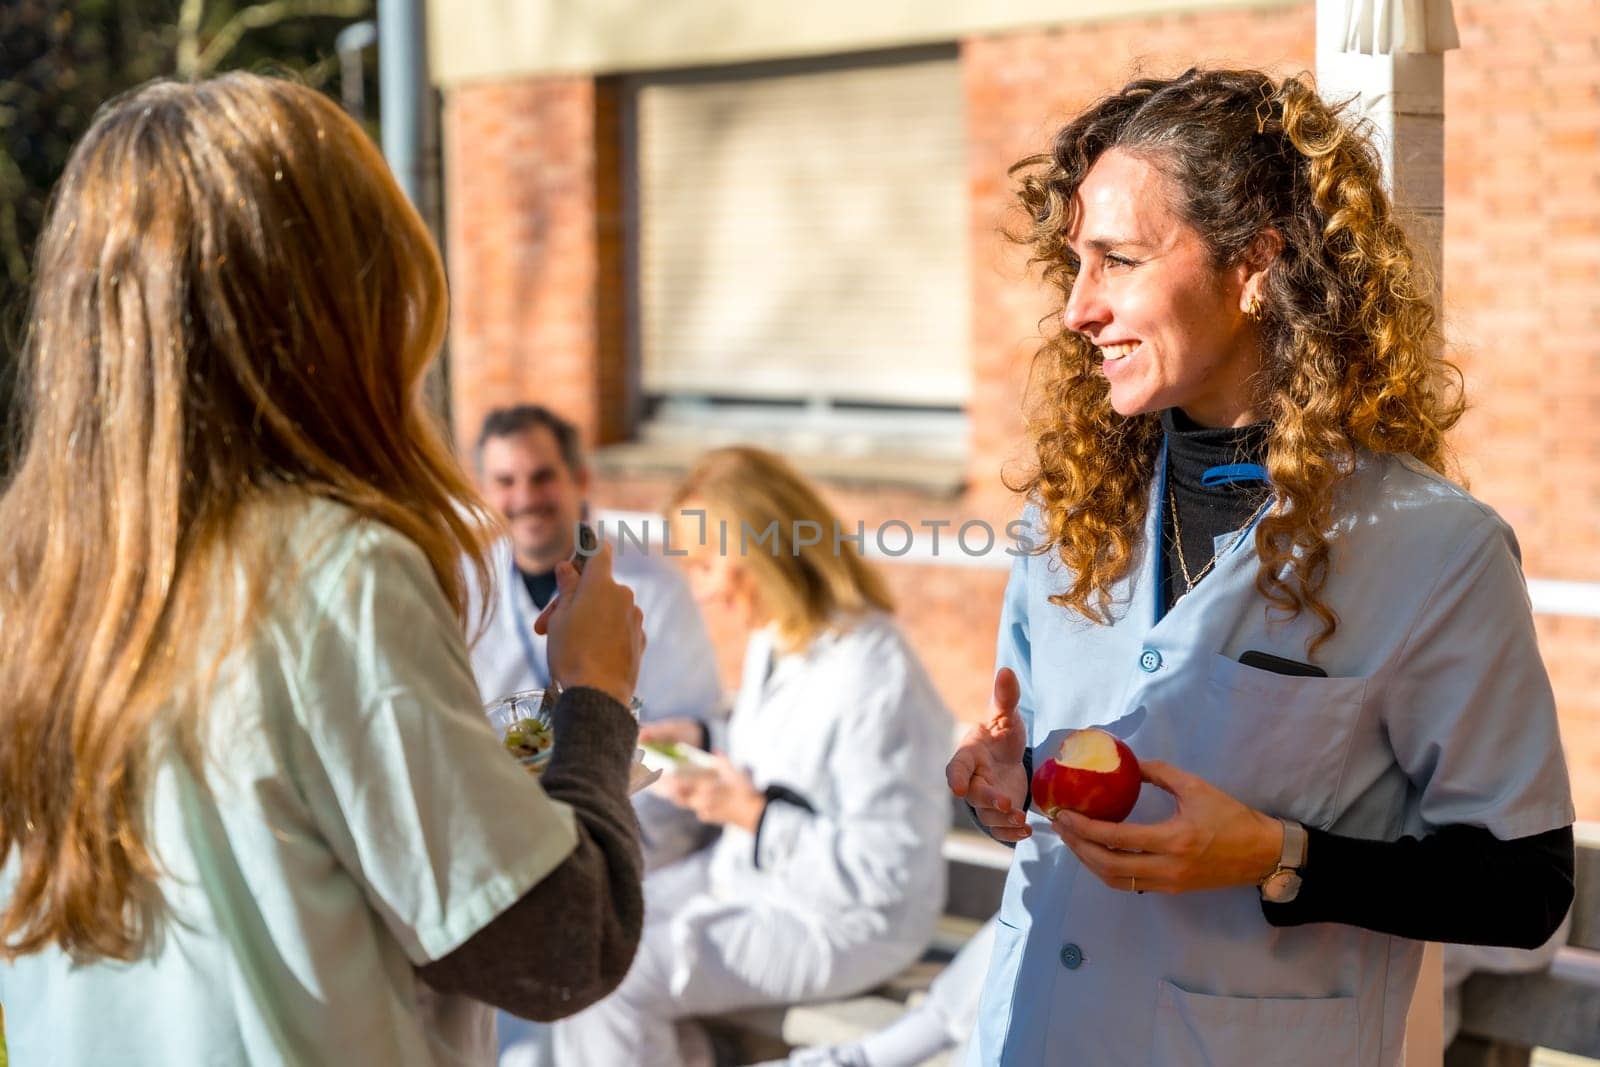 Medical staff eating during a break outside the hospital by Huizi